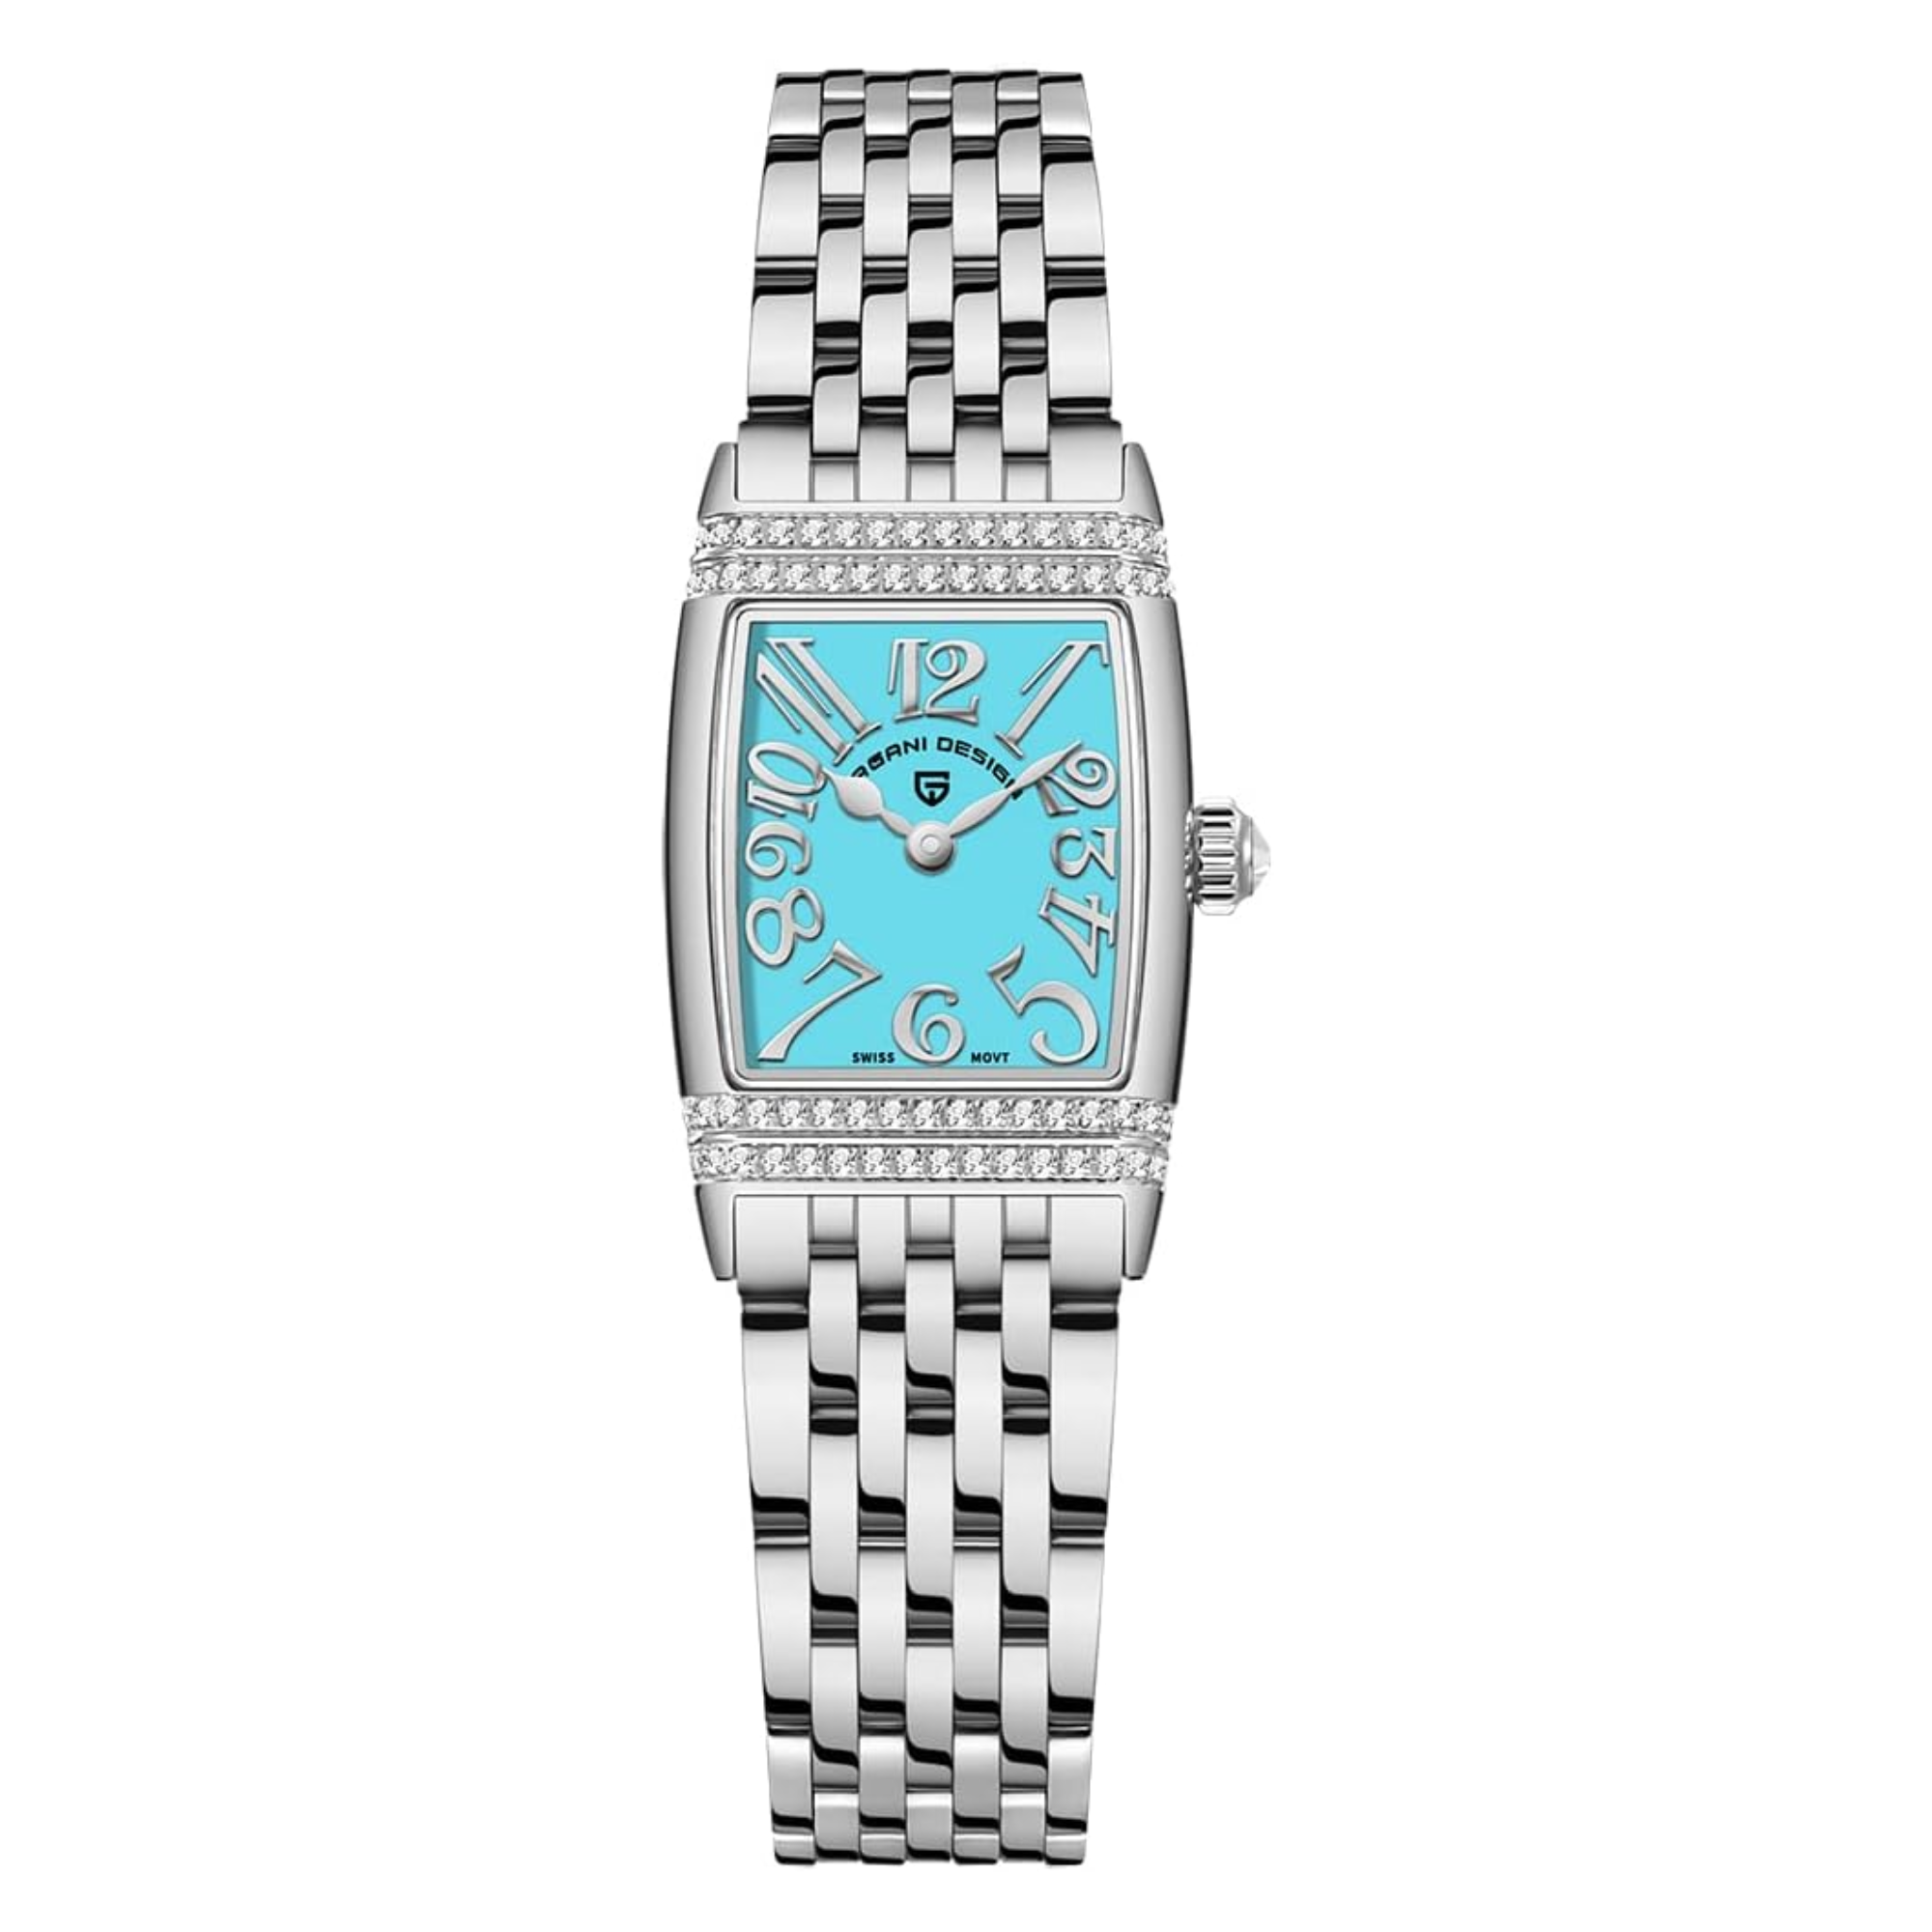 Pagani Design PD-1737 Women's Quartz Watches 22mm with Stone Set Rectangle Case, Analogue Display and Stainless Steel Ladies Watch - Silver - Tiffany Blue